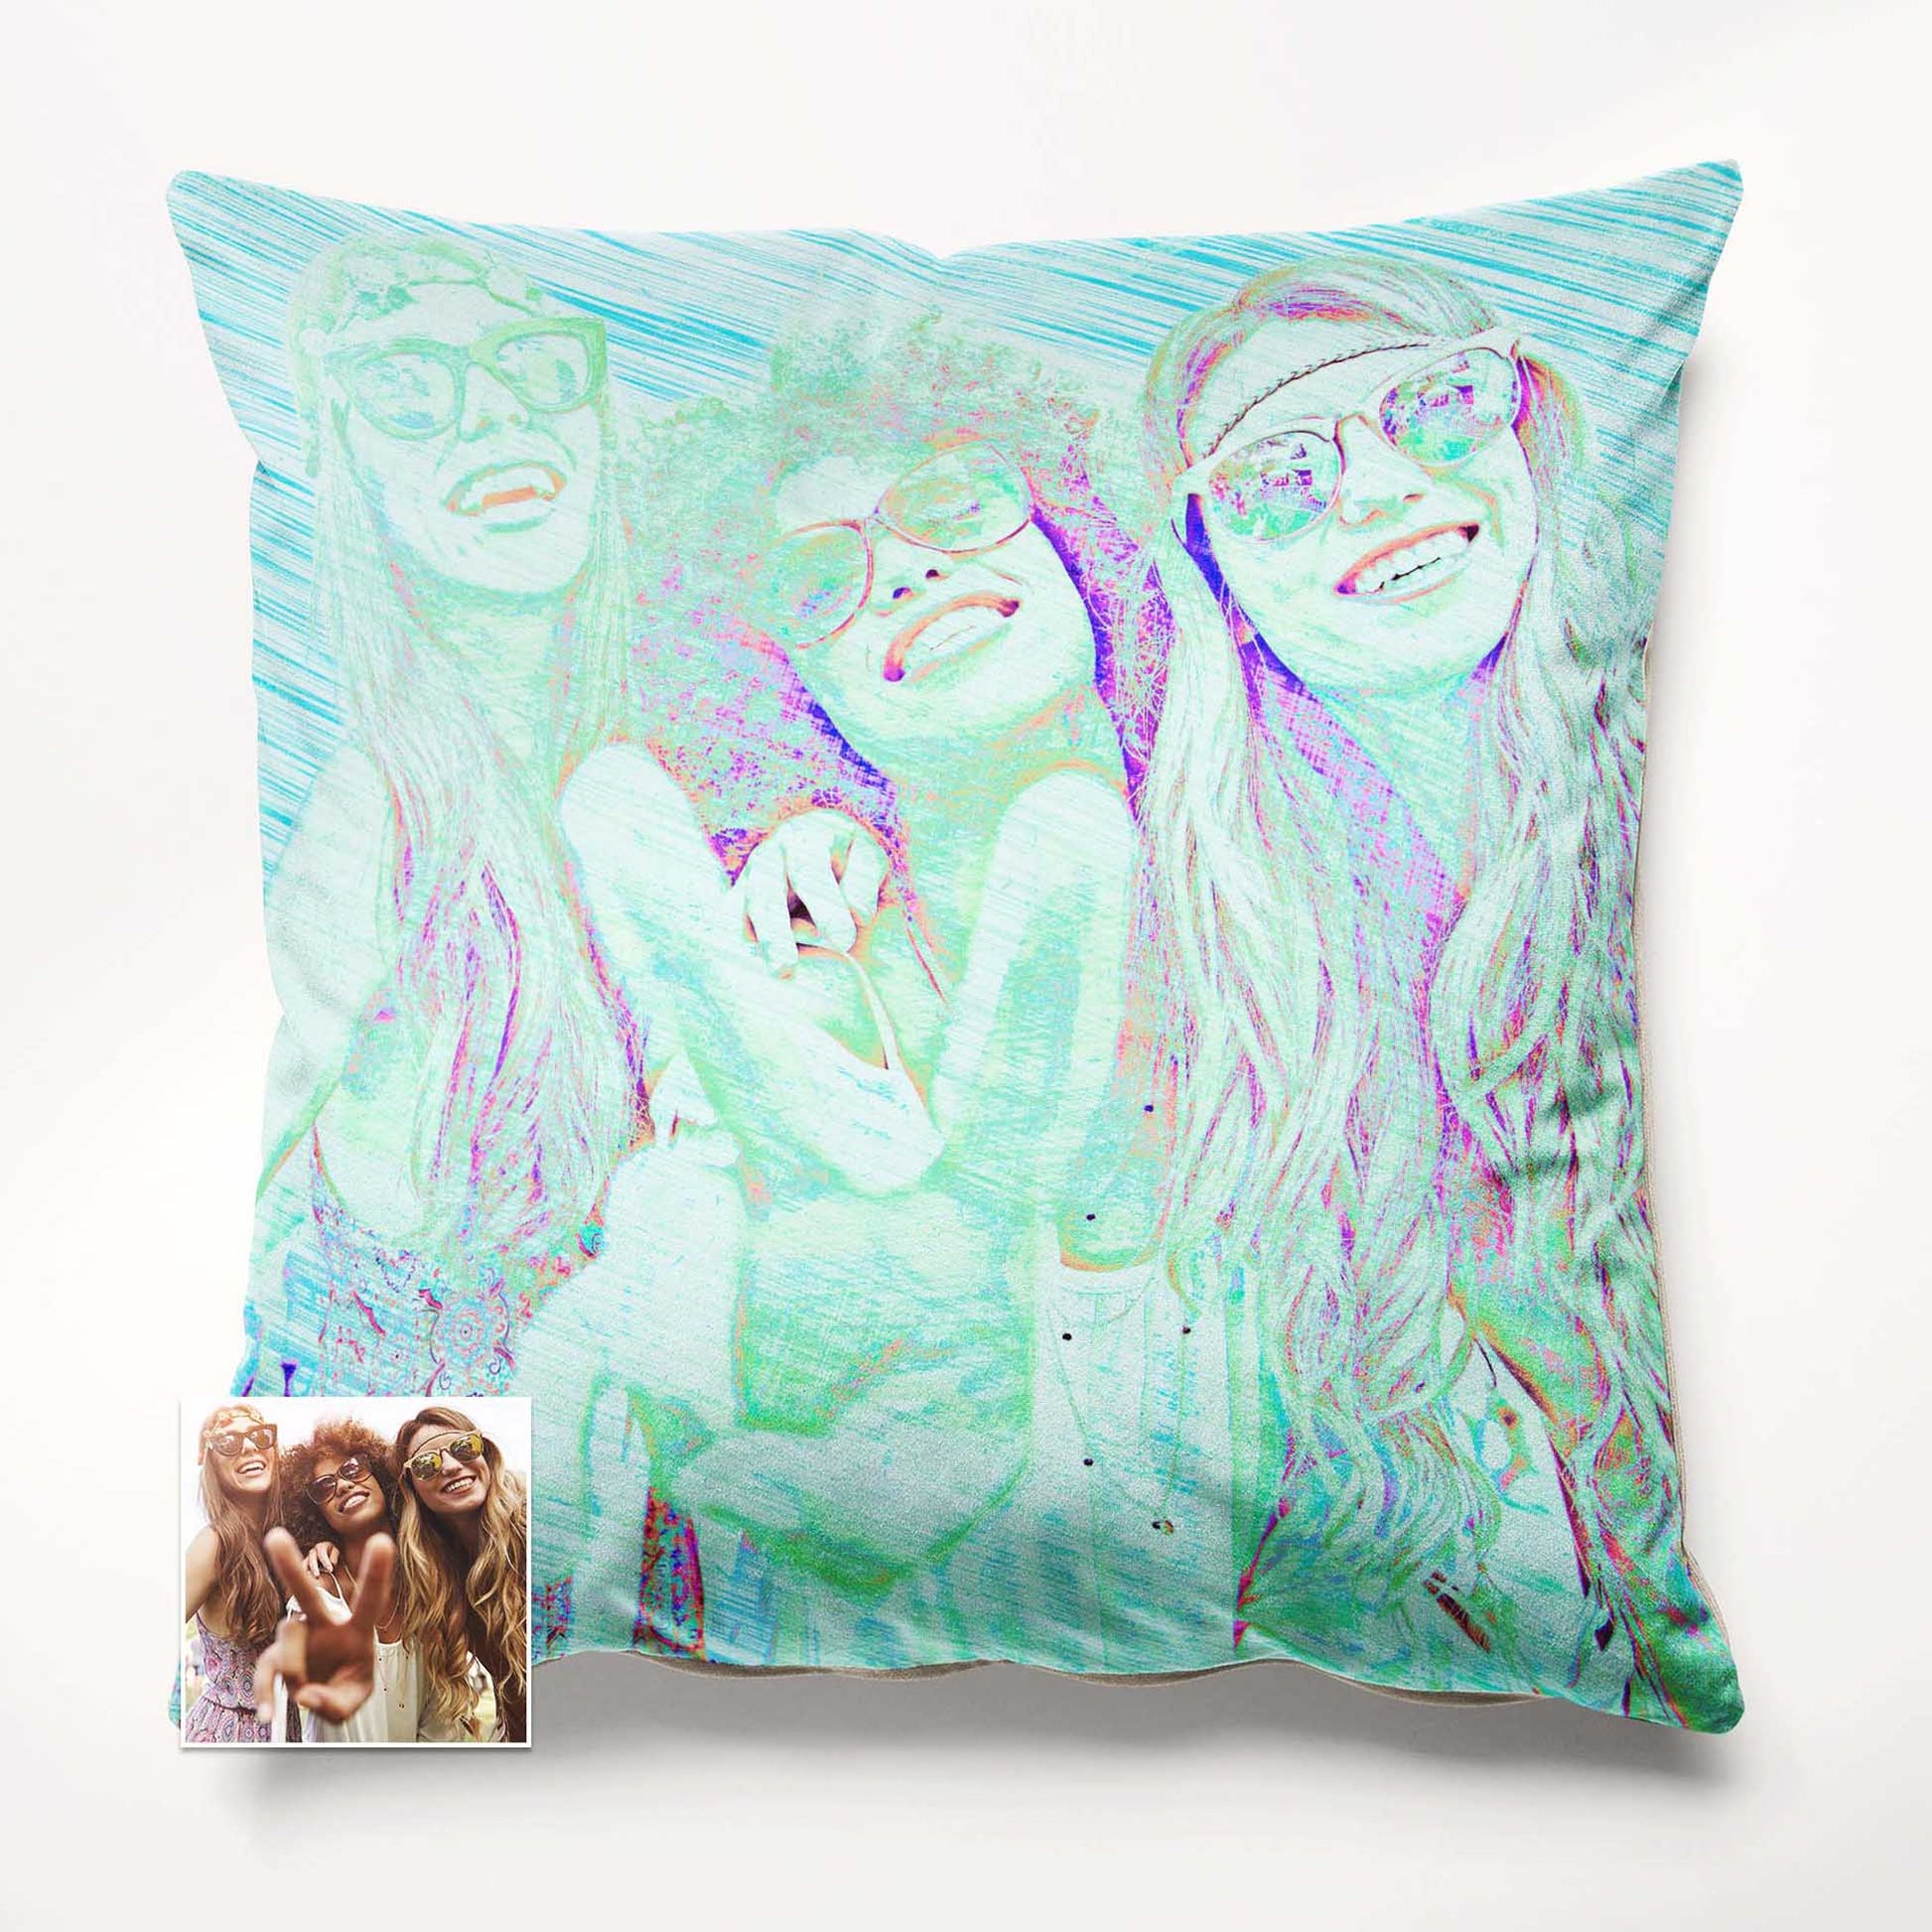 Add a touch of creativity and imagination to your home decor with the Personalised Blue Drawing Cushion. Its custom drawing, created from your photo, showcases a unique and print design. Made from soft velvet fabric